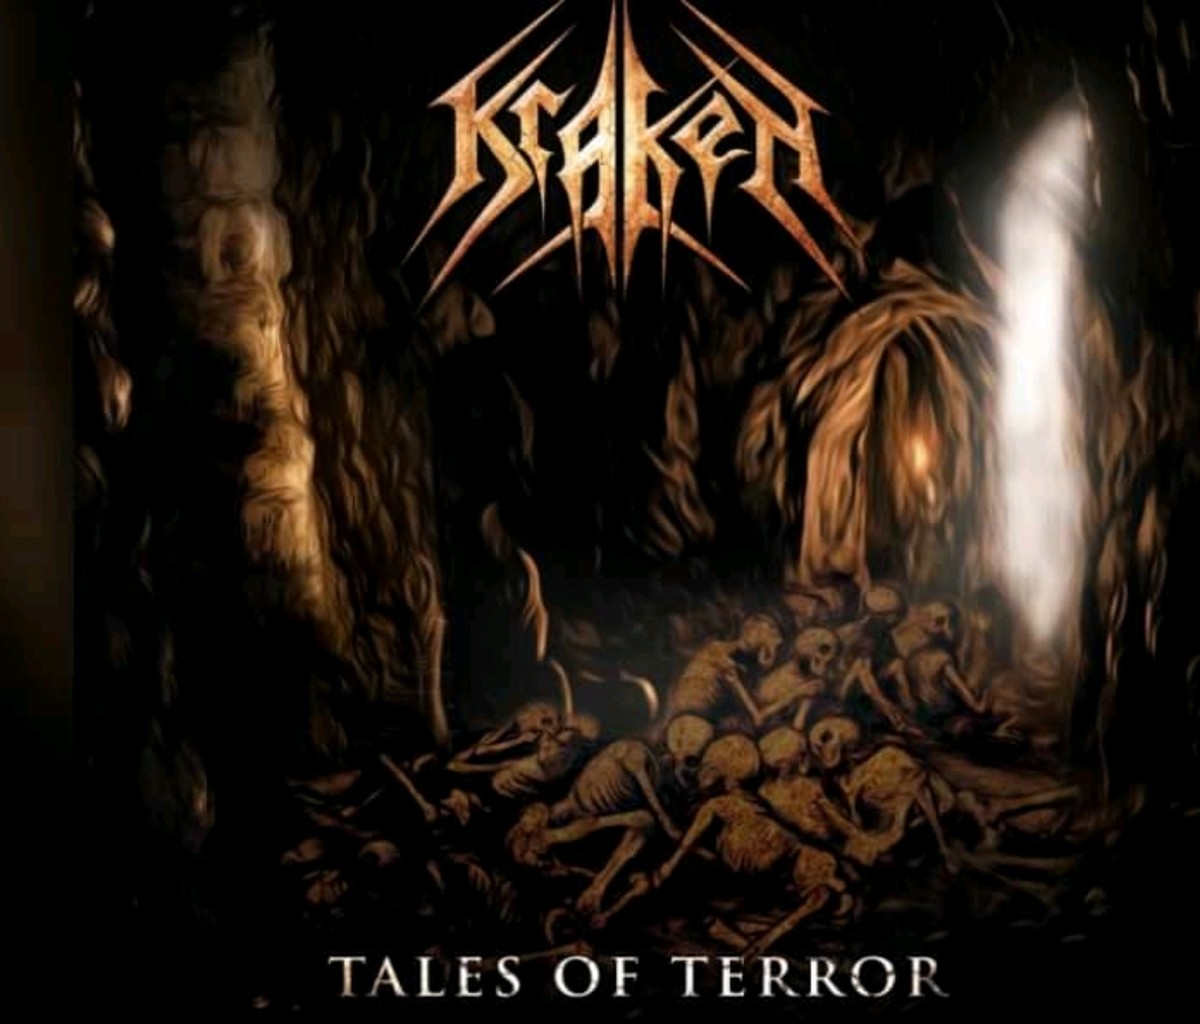 review-of-the-album-tales-of-terror-by-kraken-thrash-metal-band-from-lima-peru